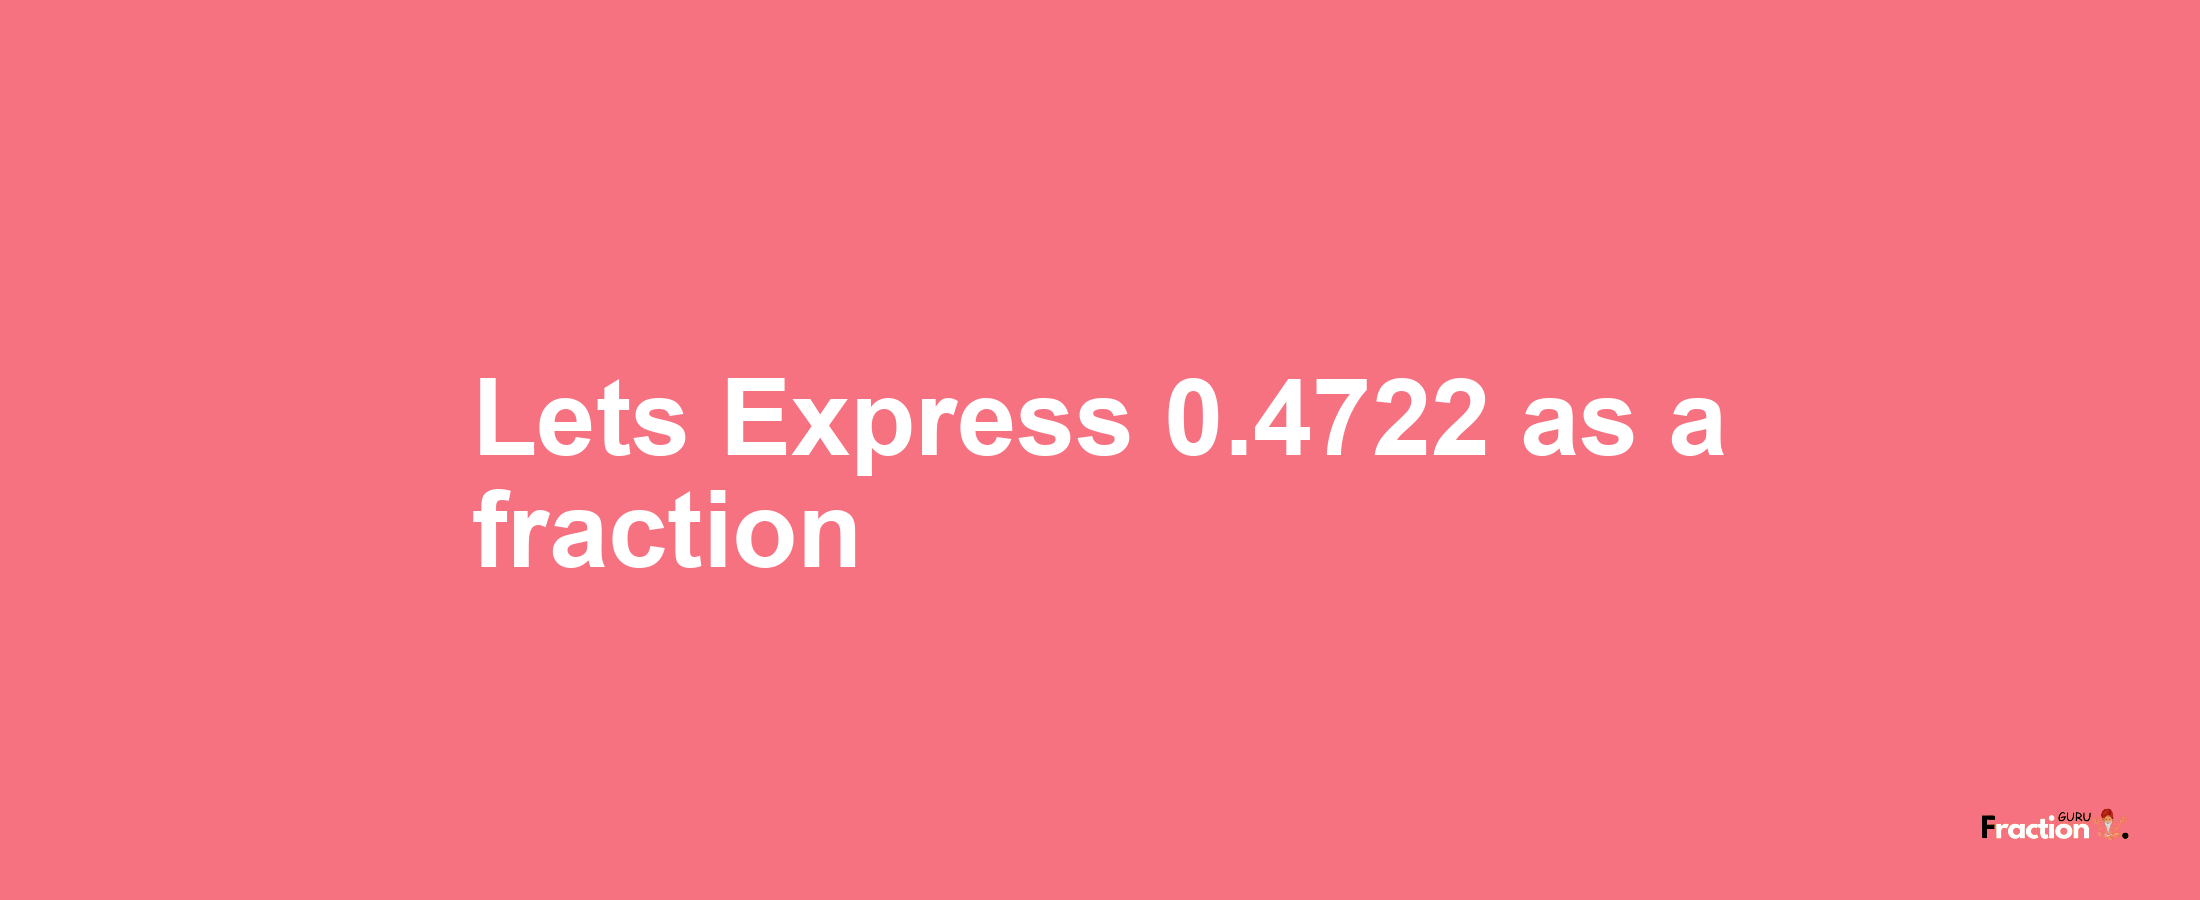 Lets Express 0.4722 as afraction